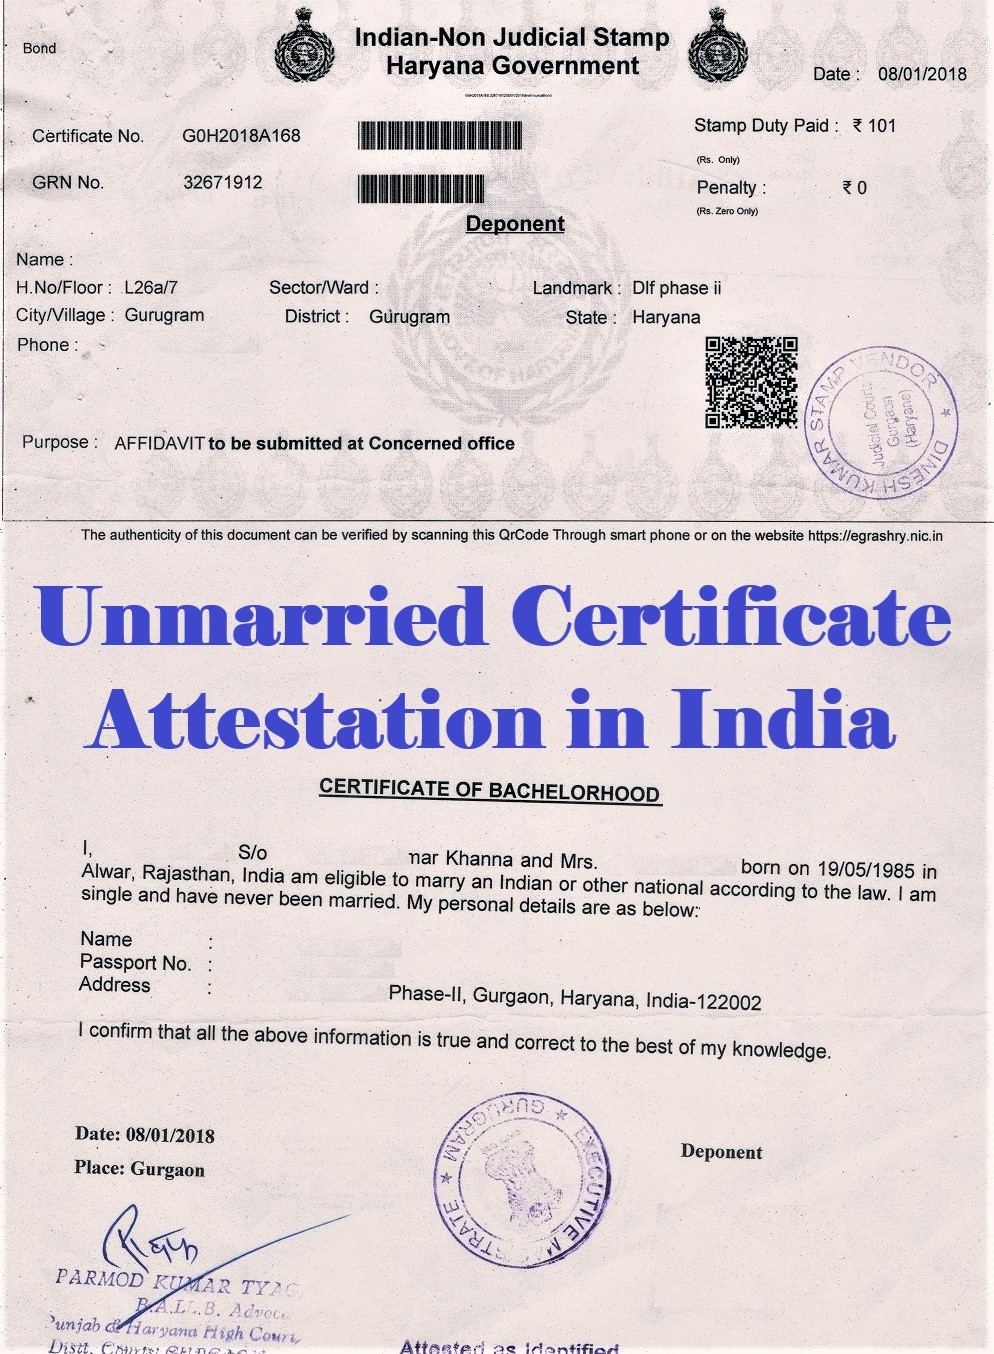 Unmarried Certificate Attestation from Madagascar Embassy